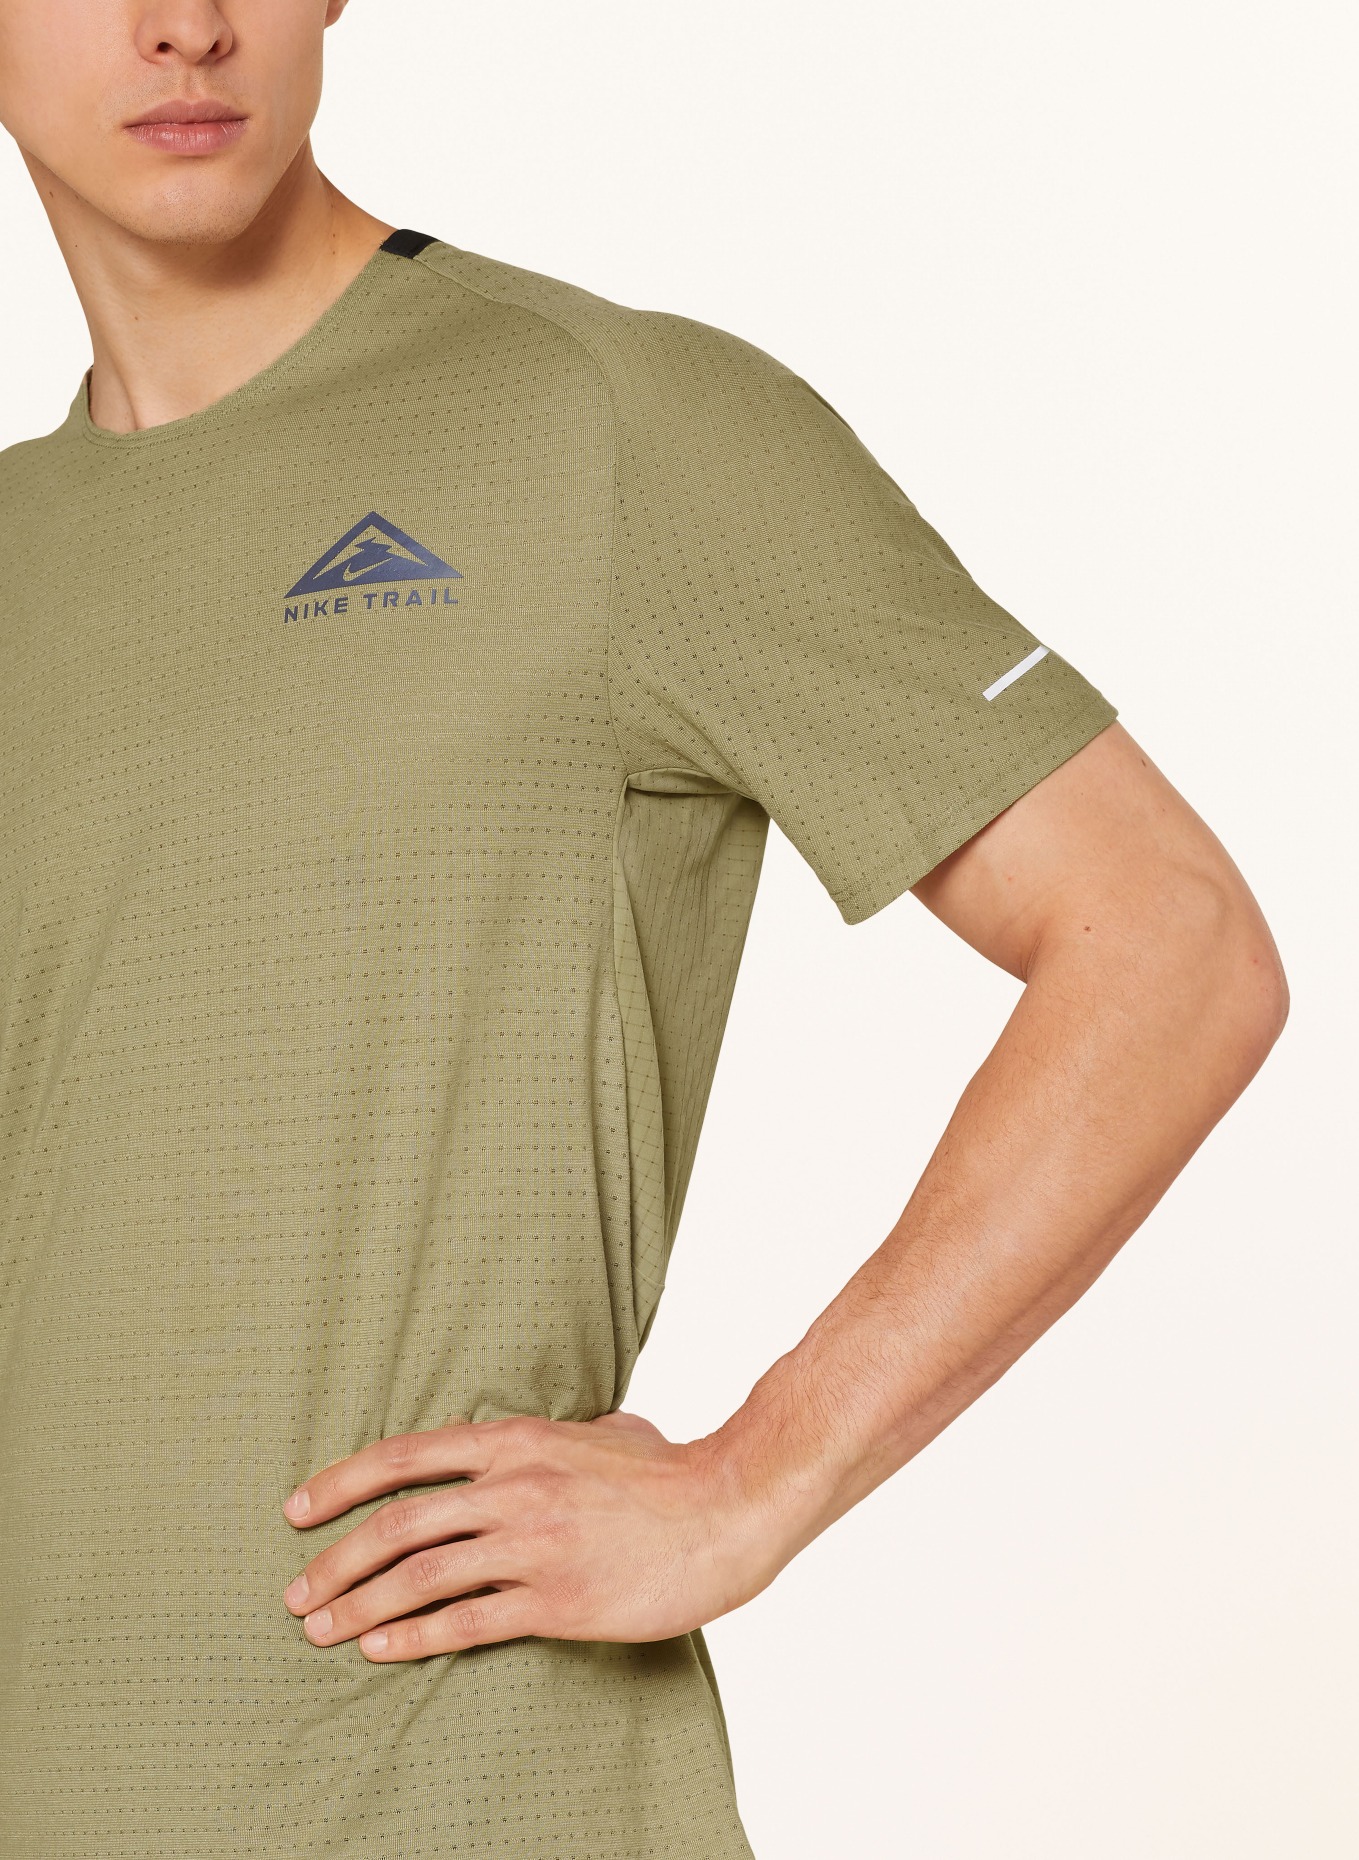 Nike Running shirt TRAIL SOLAR CHASE, Color: OLIVE (Image 4)